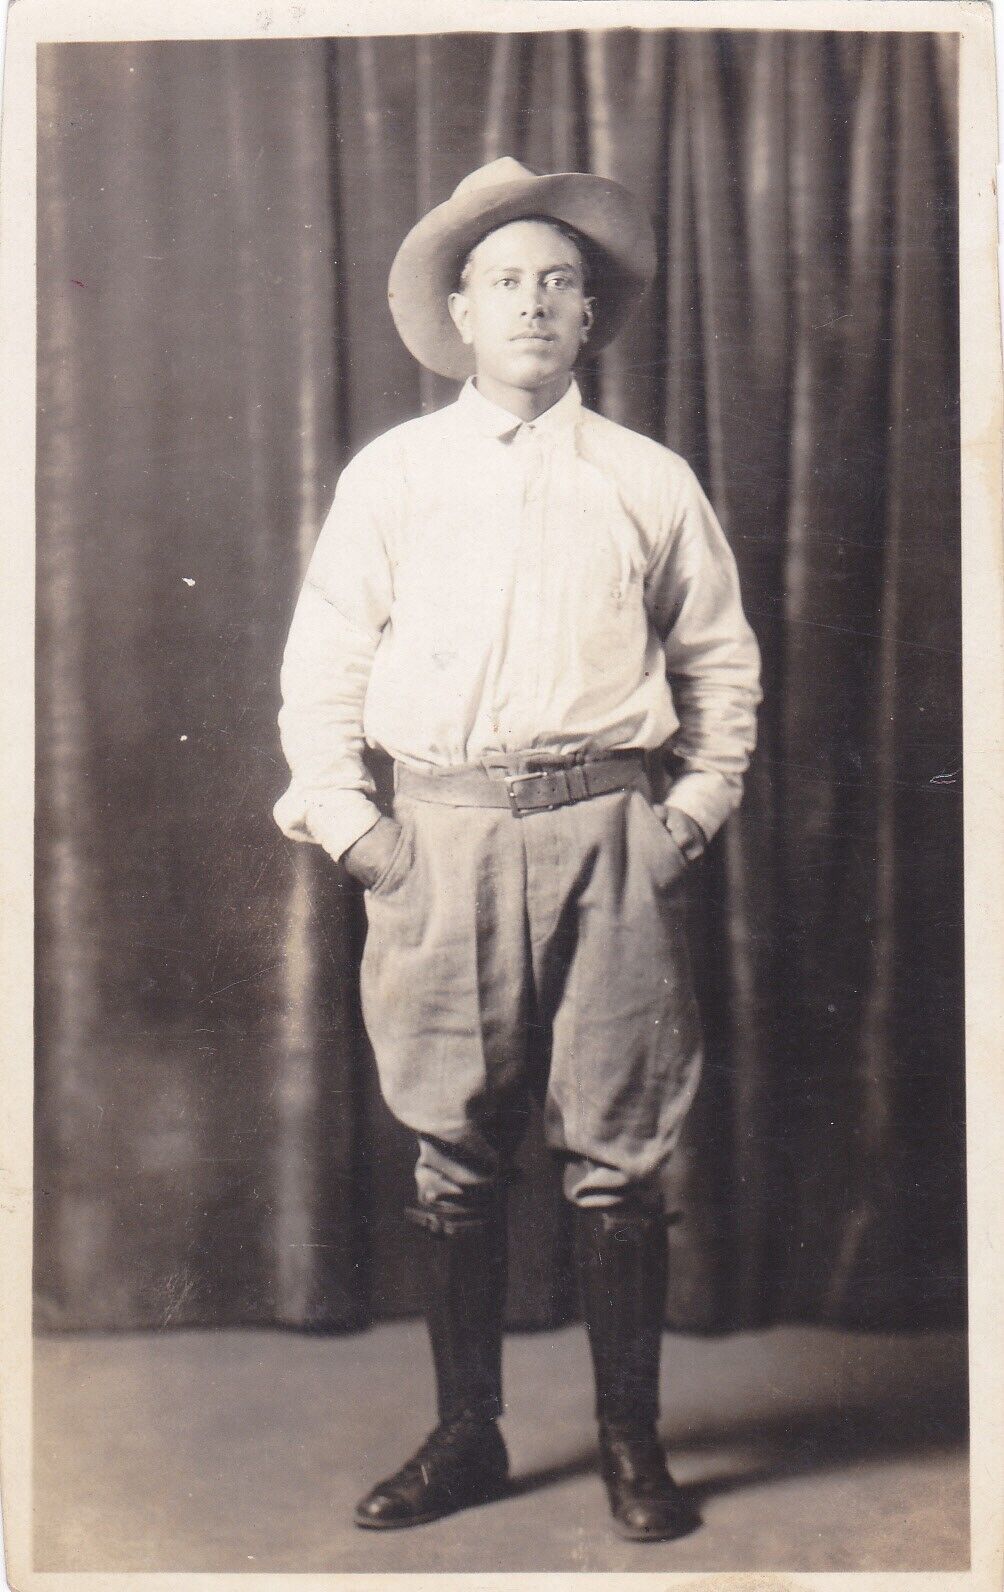 RPPC Postcard of Spanish Cowboy maybe from Mexico or Mexican Revolution ID Name